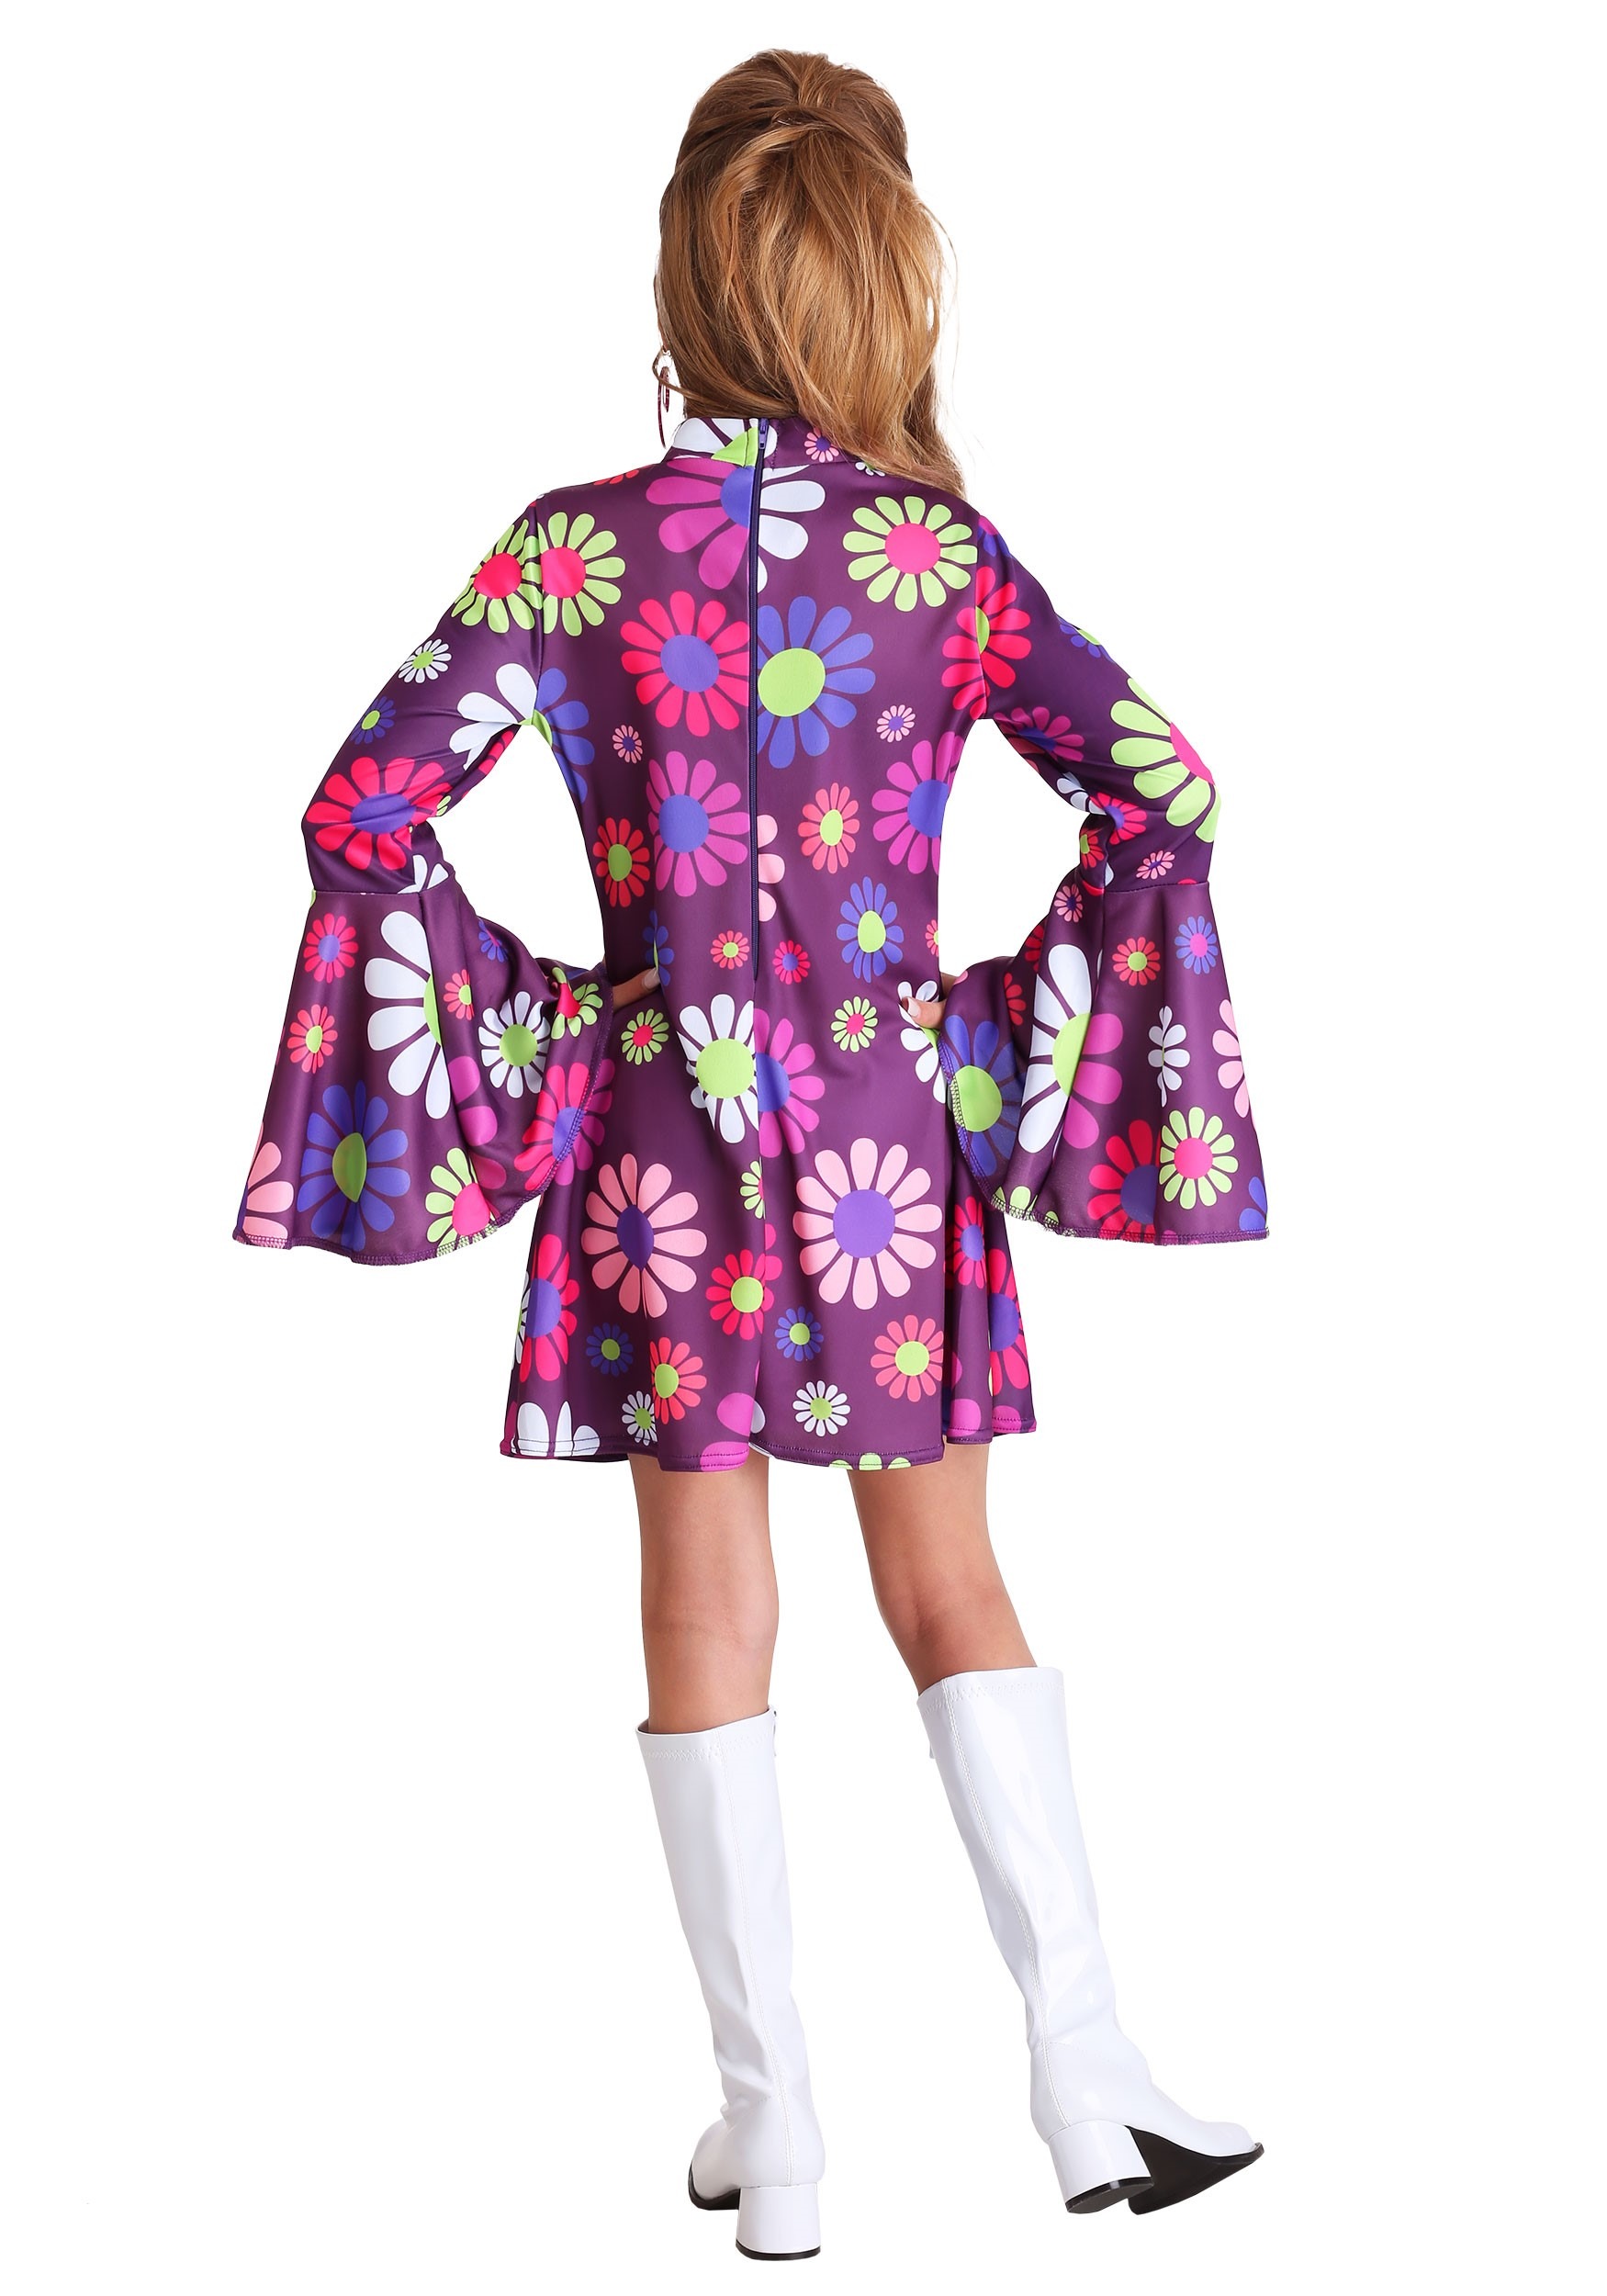 Far Out Hippie Costume For Girl's